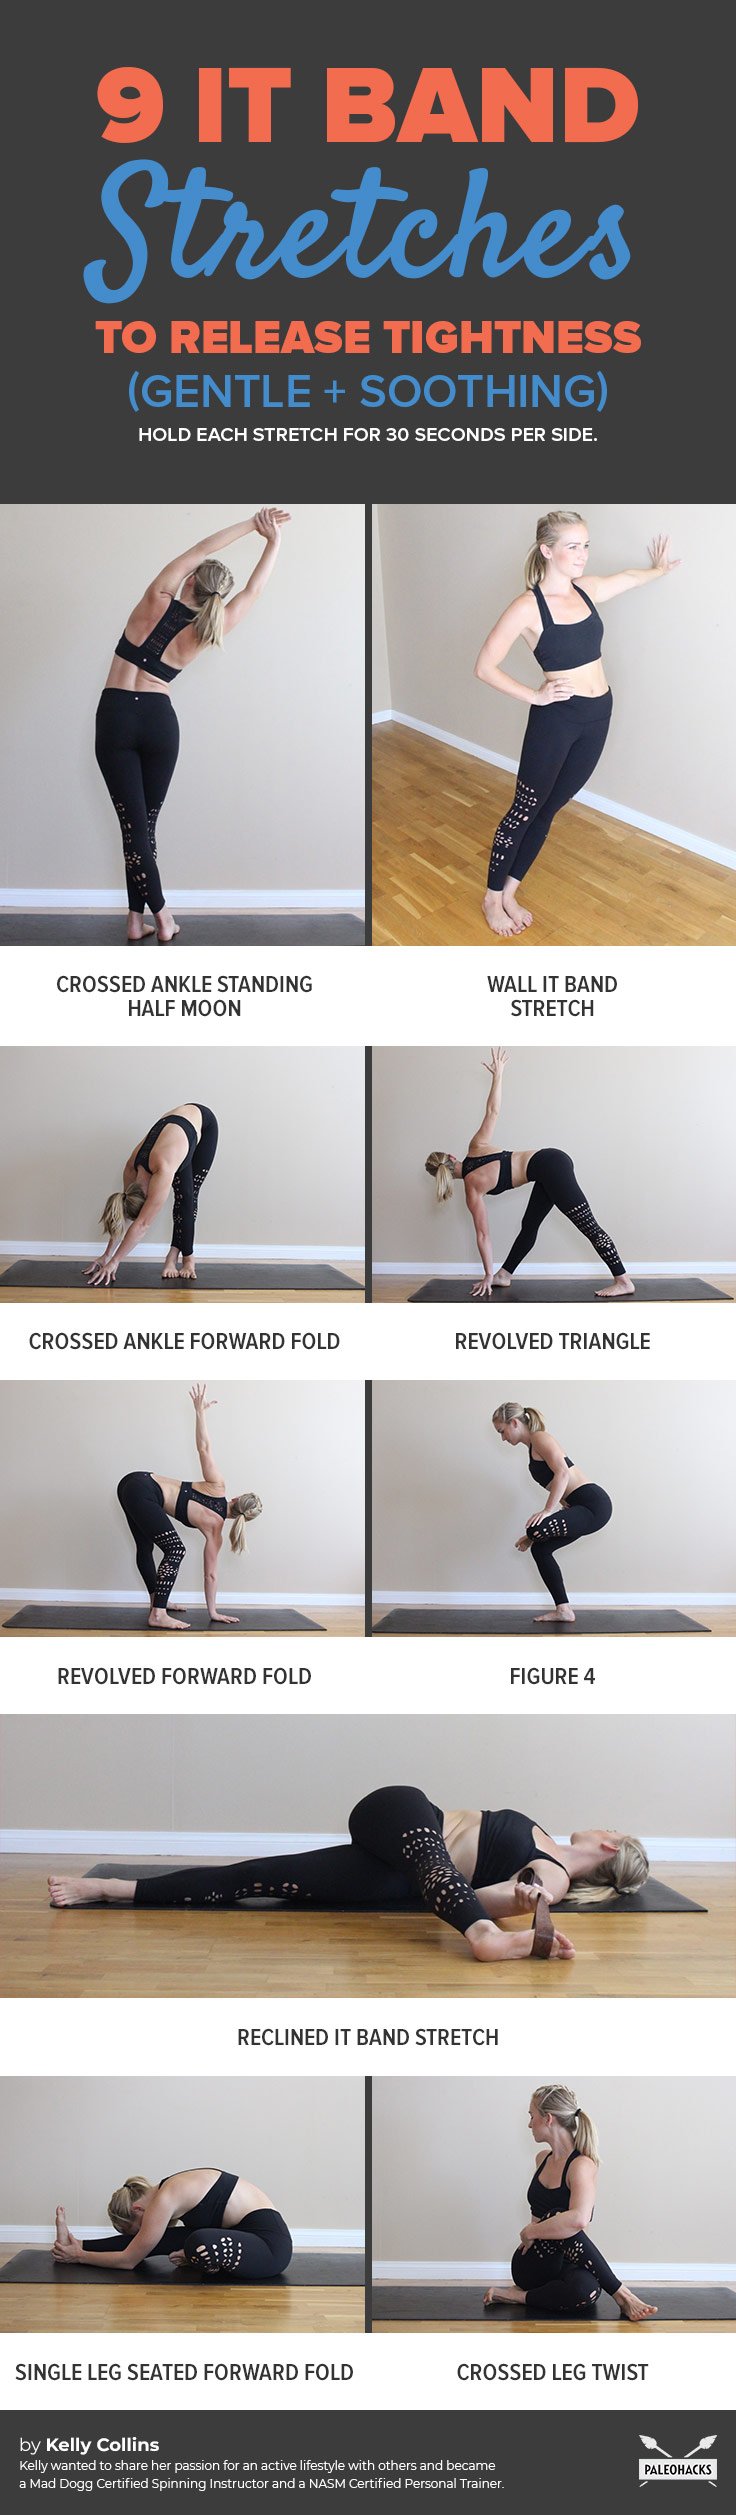 Suffering from painful IT bands? Try these soothing stretches to relieve tight IT bands and balance the muscles around them.